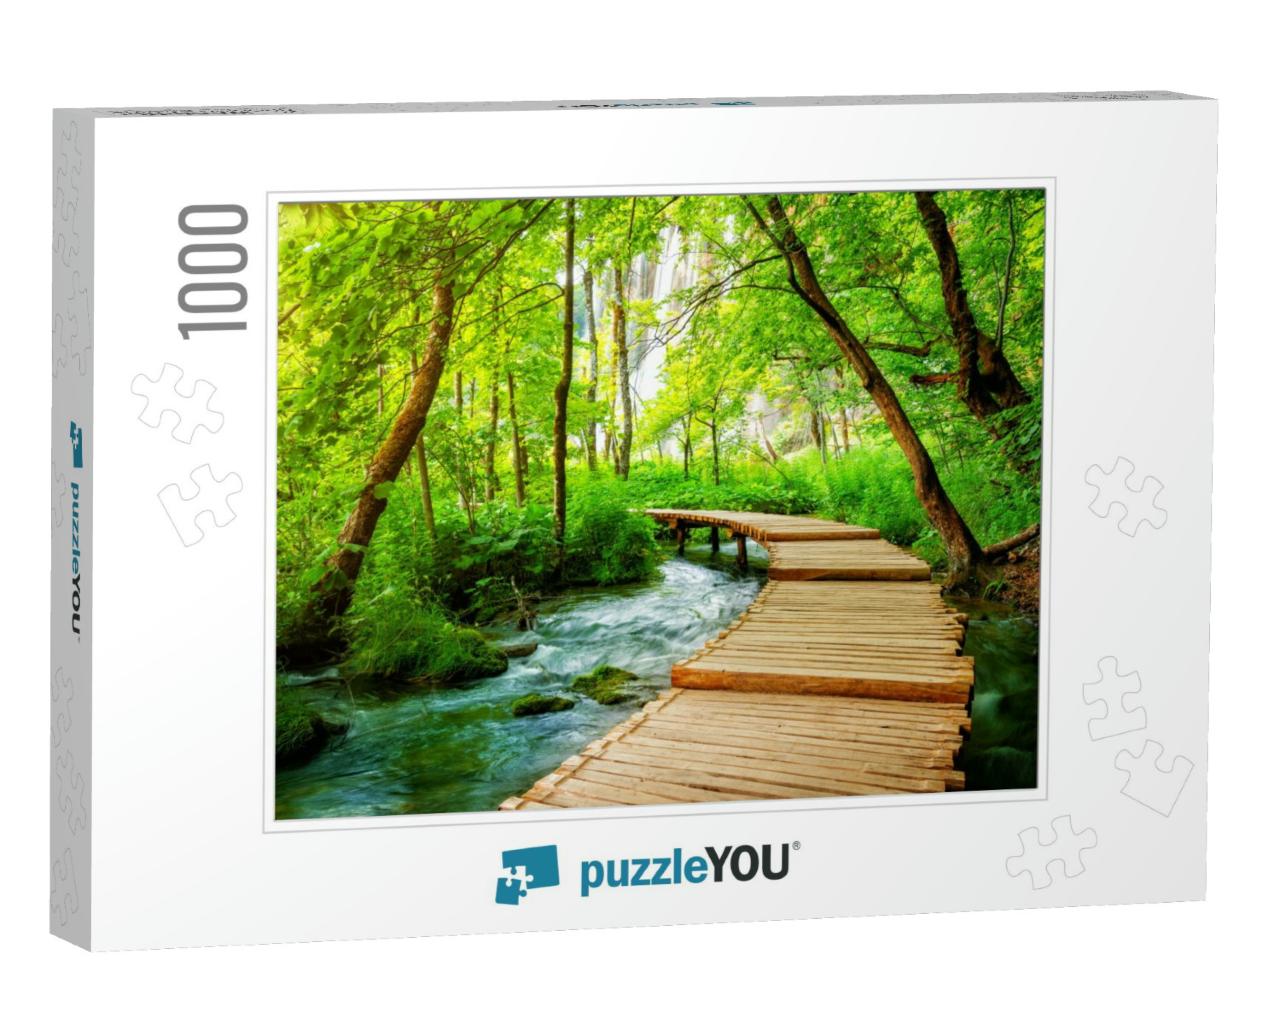 Beautiful Wooden Path Trail for Nature Trekking with Lake... Jigsaw Puzzle with 1000 pieces